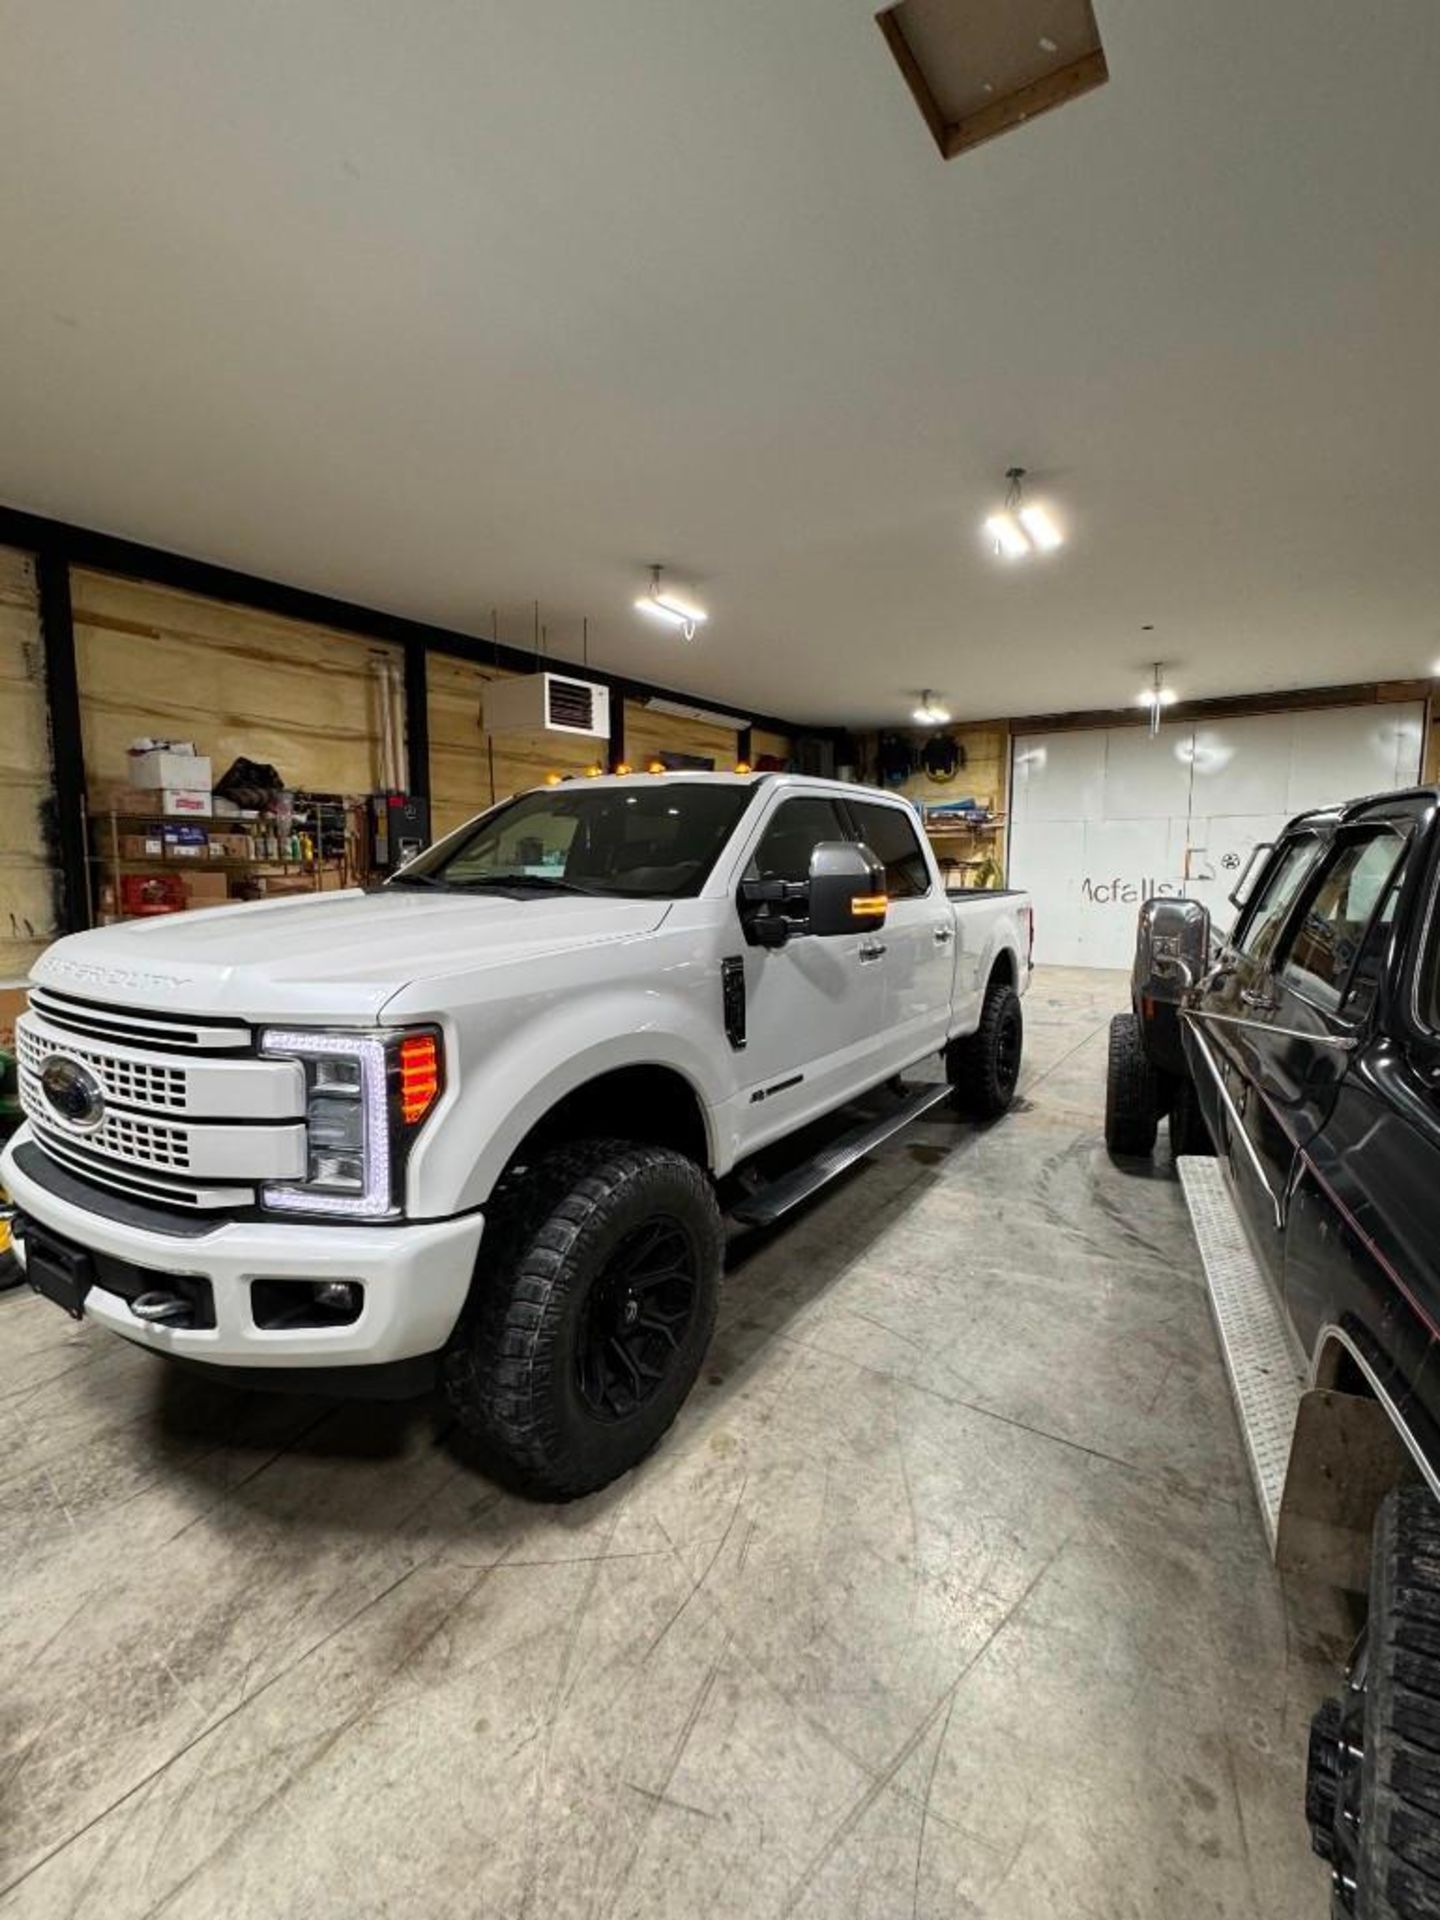 2017 Ford F-250 Pickup Truck (located off-site, please read description) - Image 9 of 15